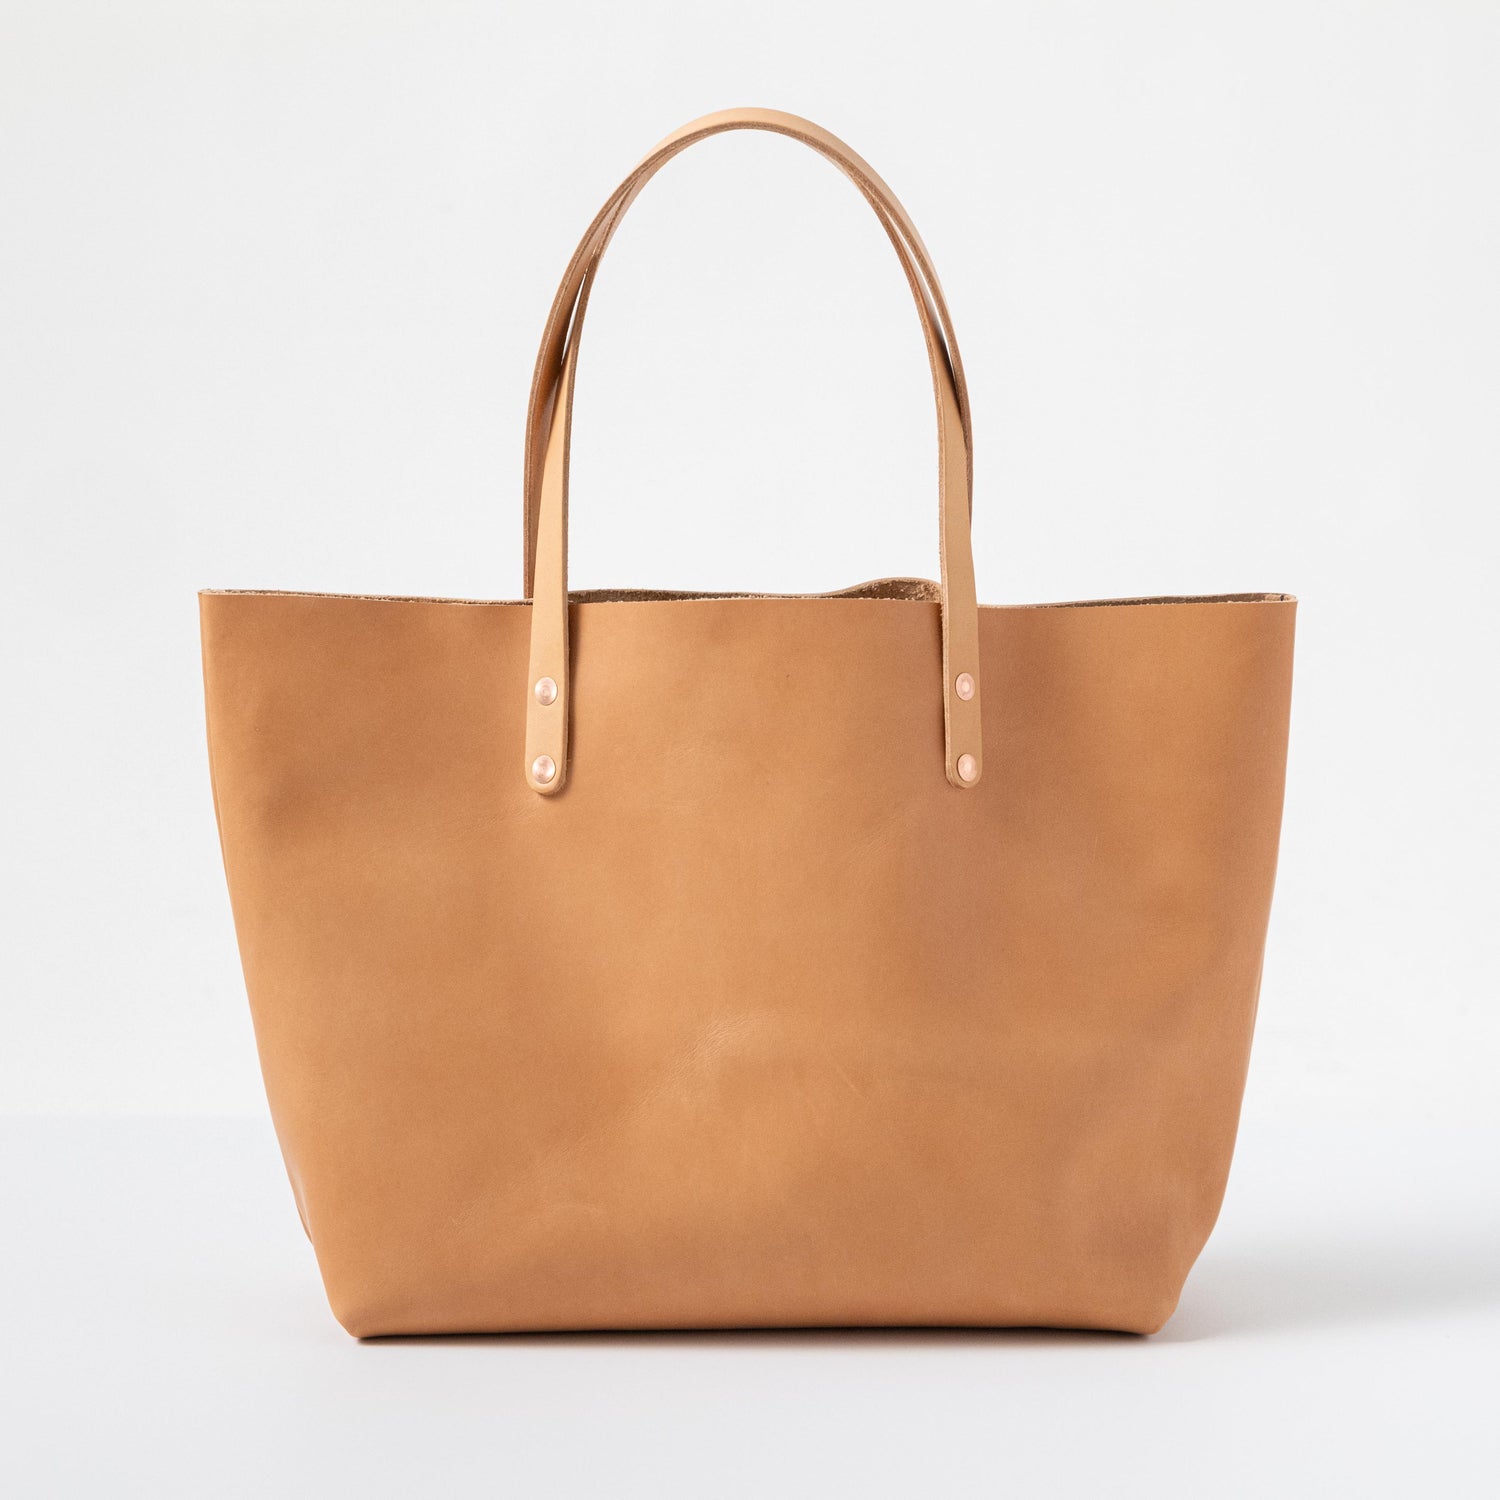 Natural Essex Tote | Horween Tote Bag Handmade at KMM & Co. 11-inch +$25 / Snap and Crossbody Strap (FINAL Sale) +$75